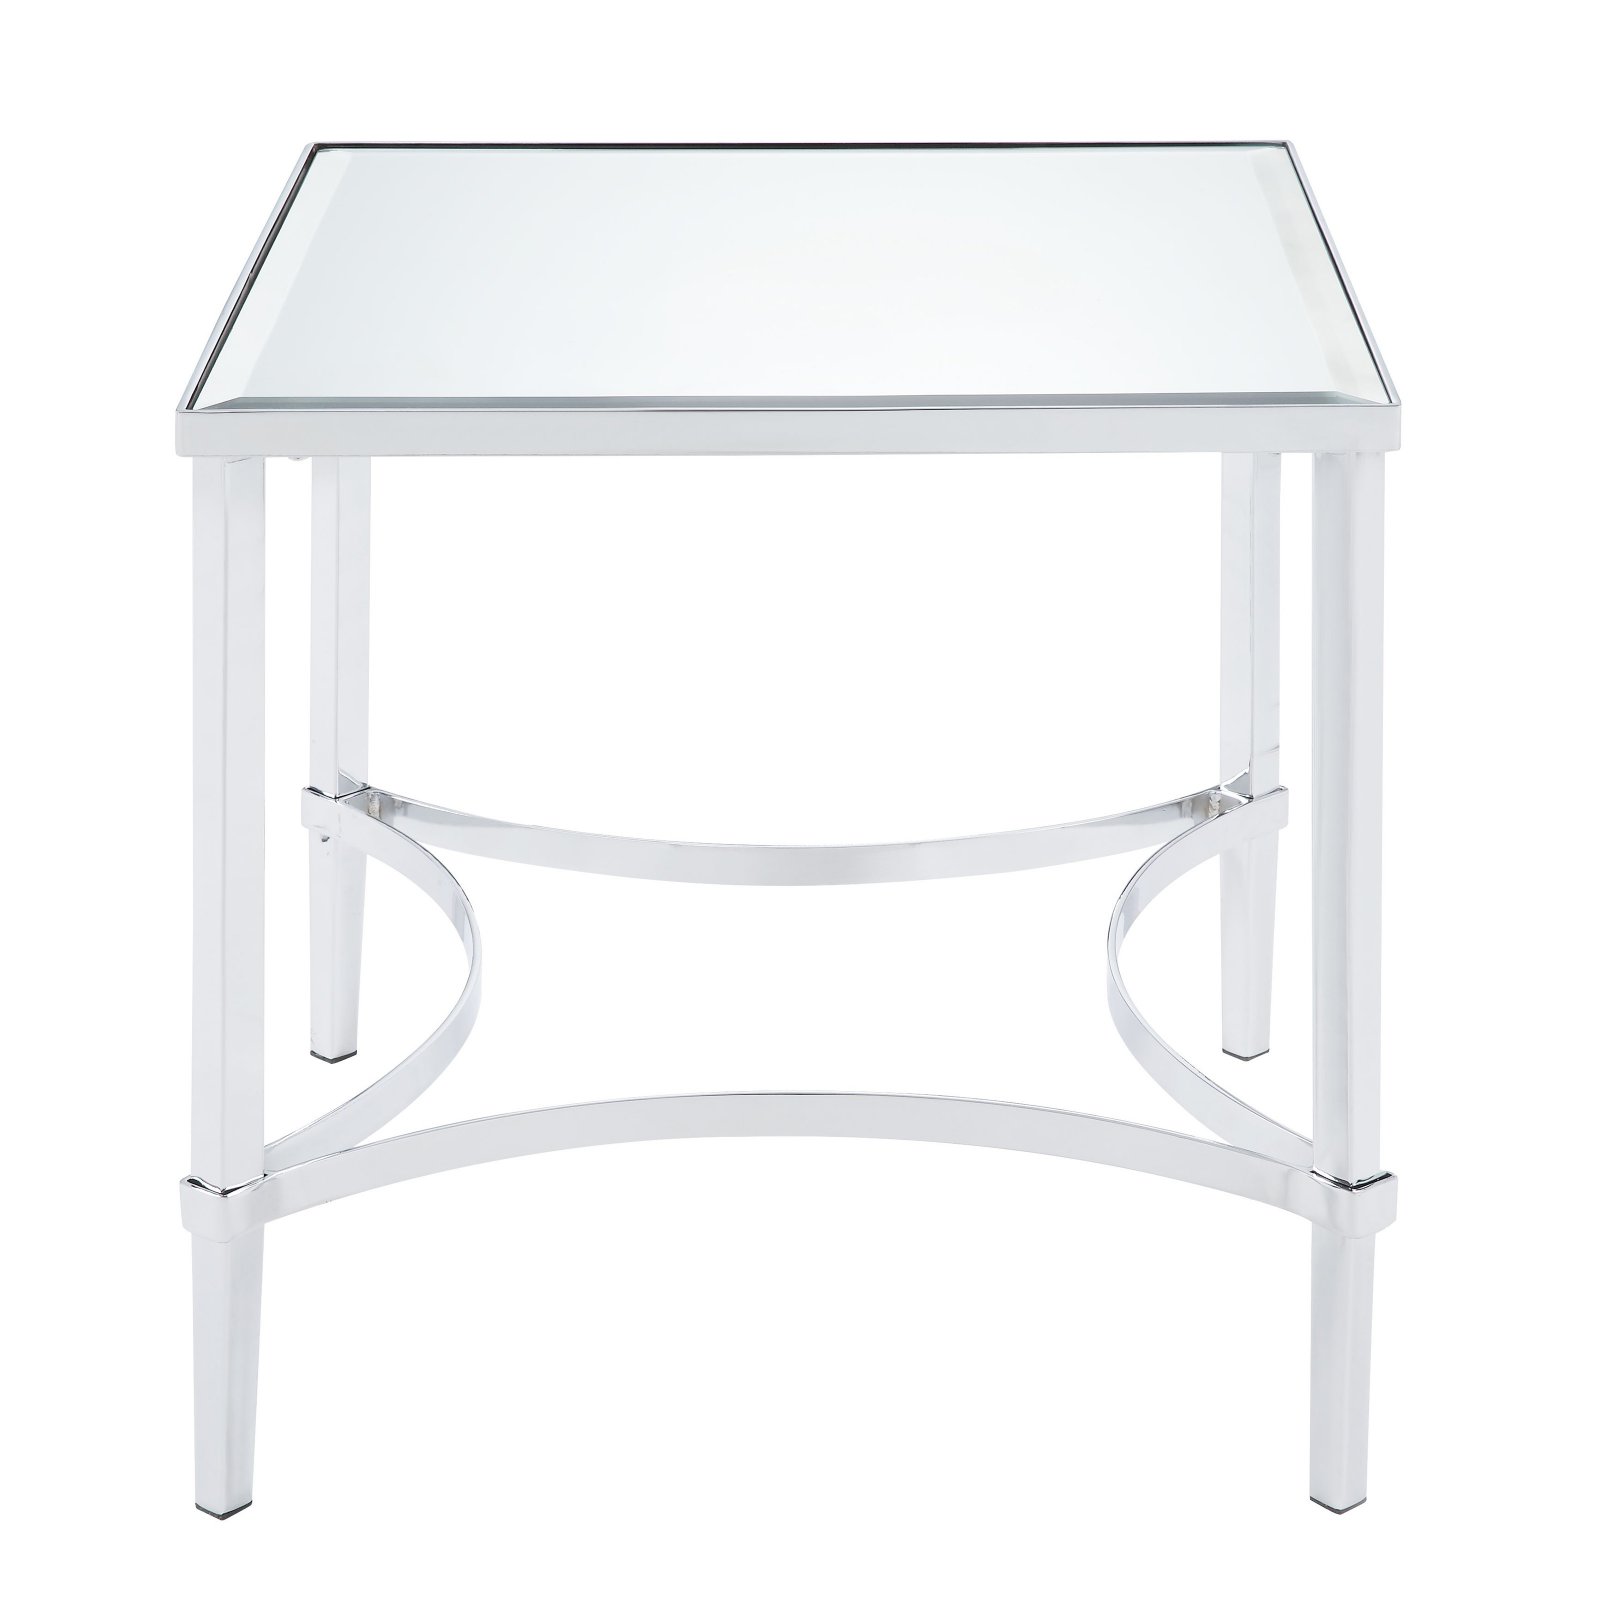 ACME 80192 Petunia End Table - Chrome & Mirror - 24 x 22 x 22 in. - image 2 of 4